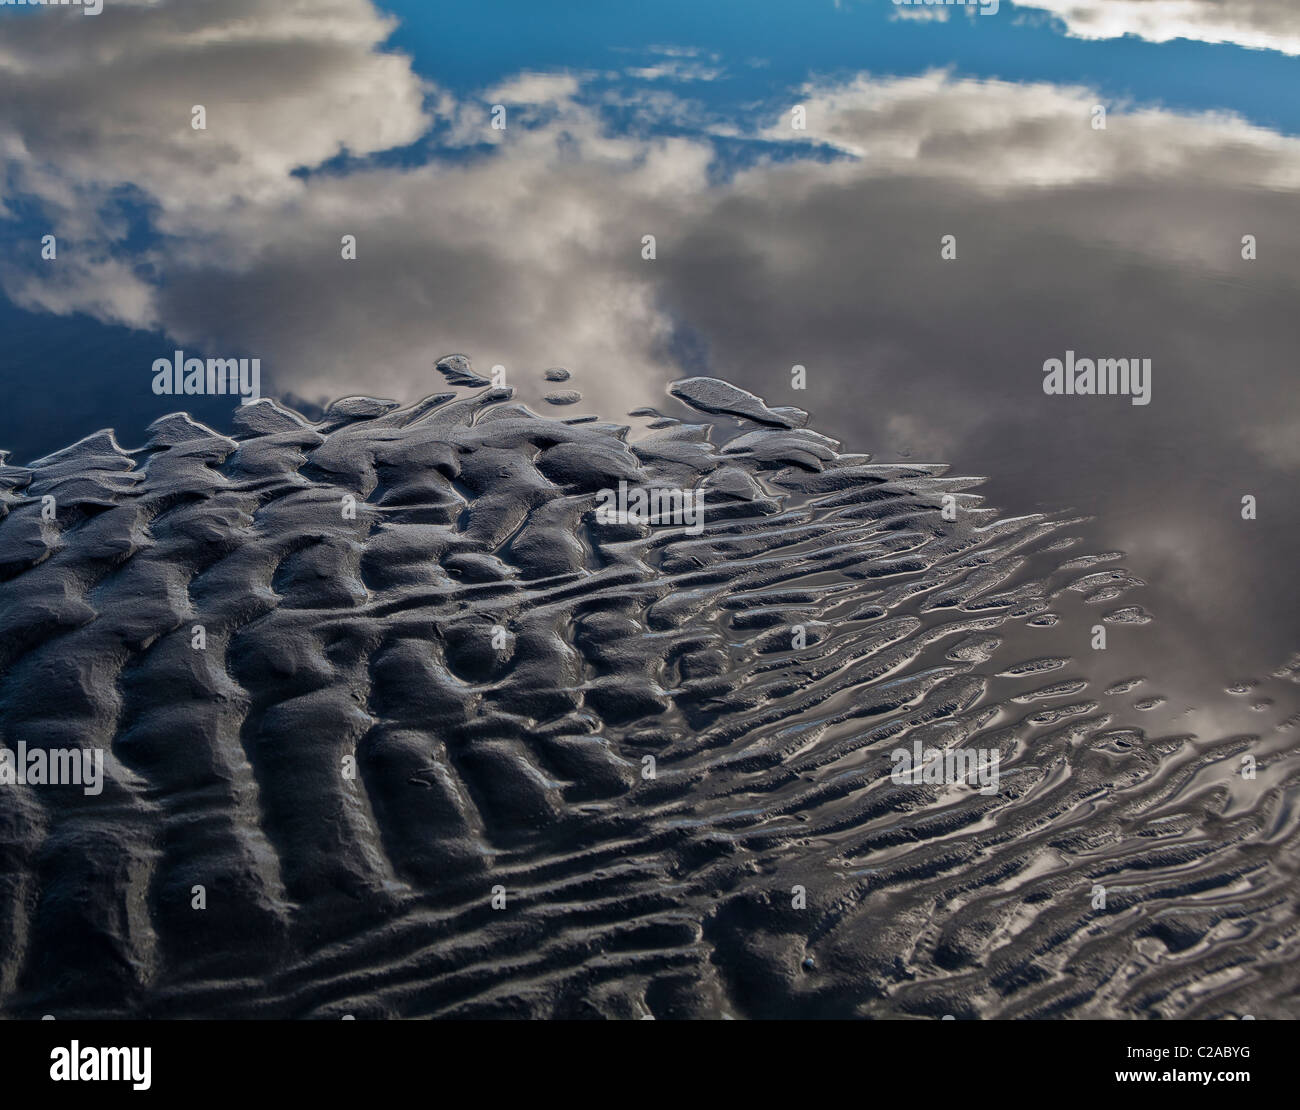 Mirror image, clouds, black sands, water Stock Photo